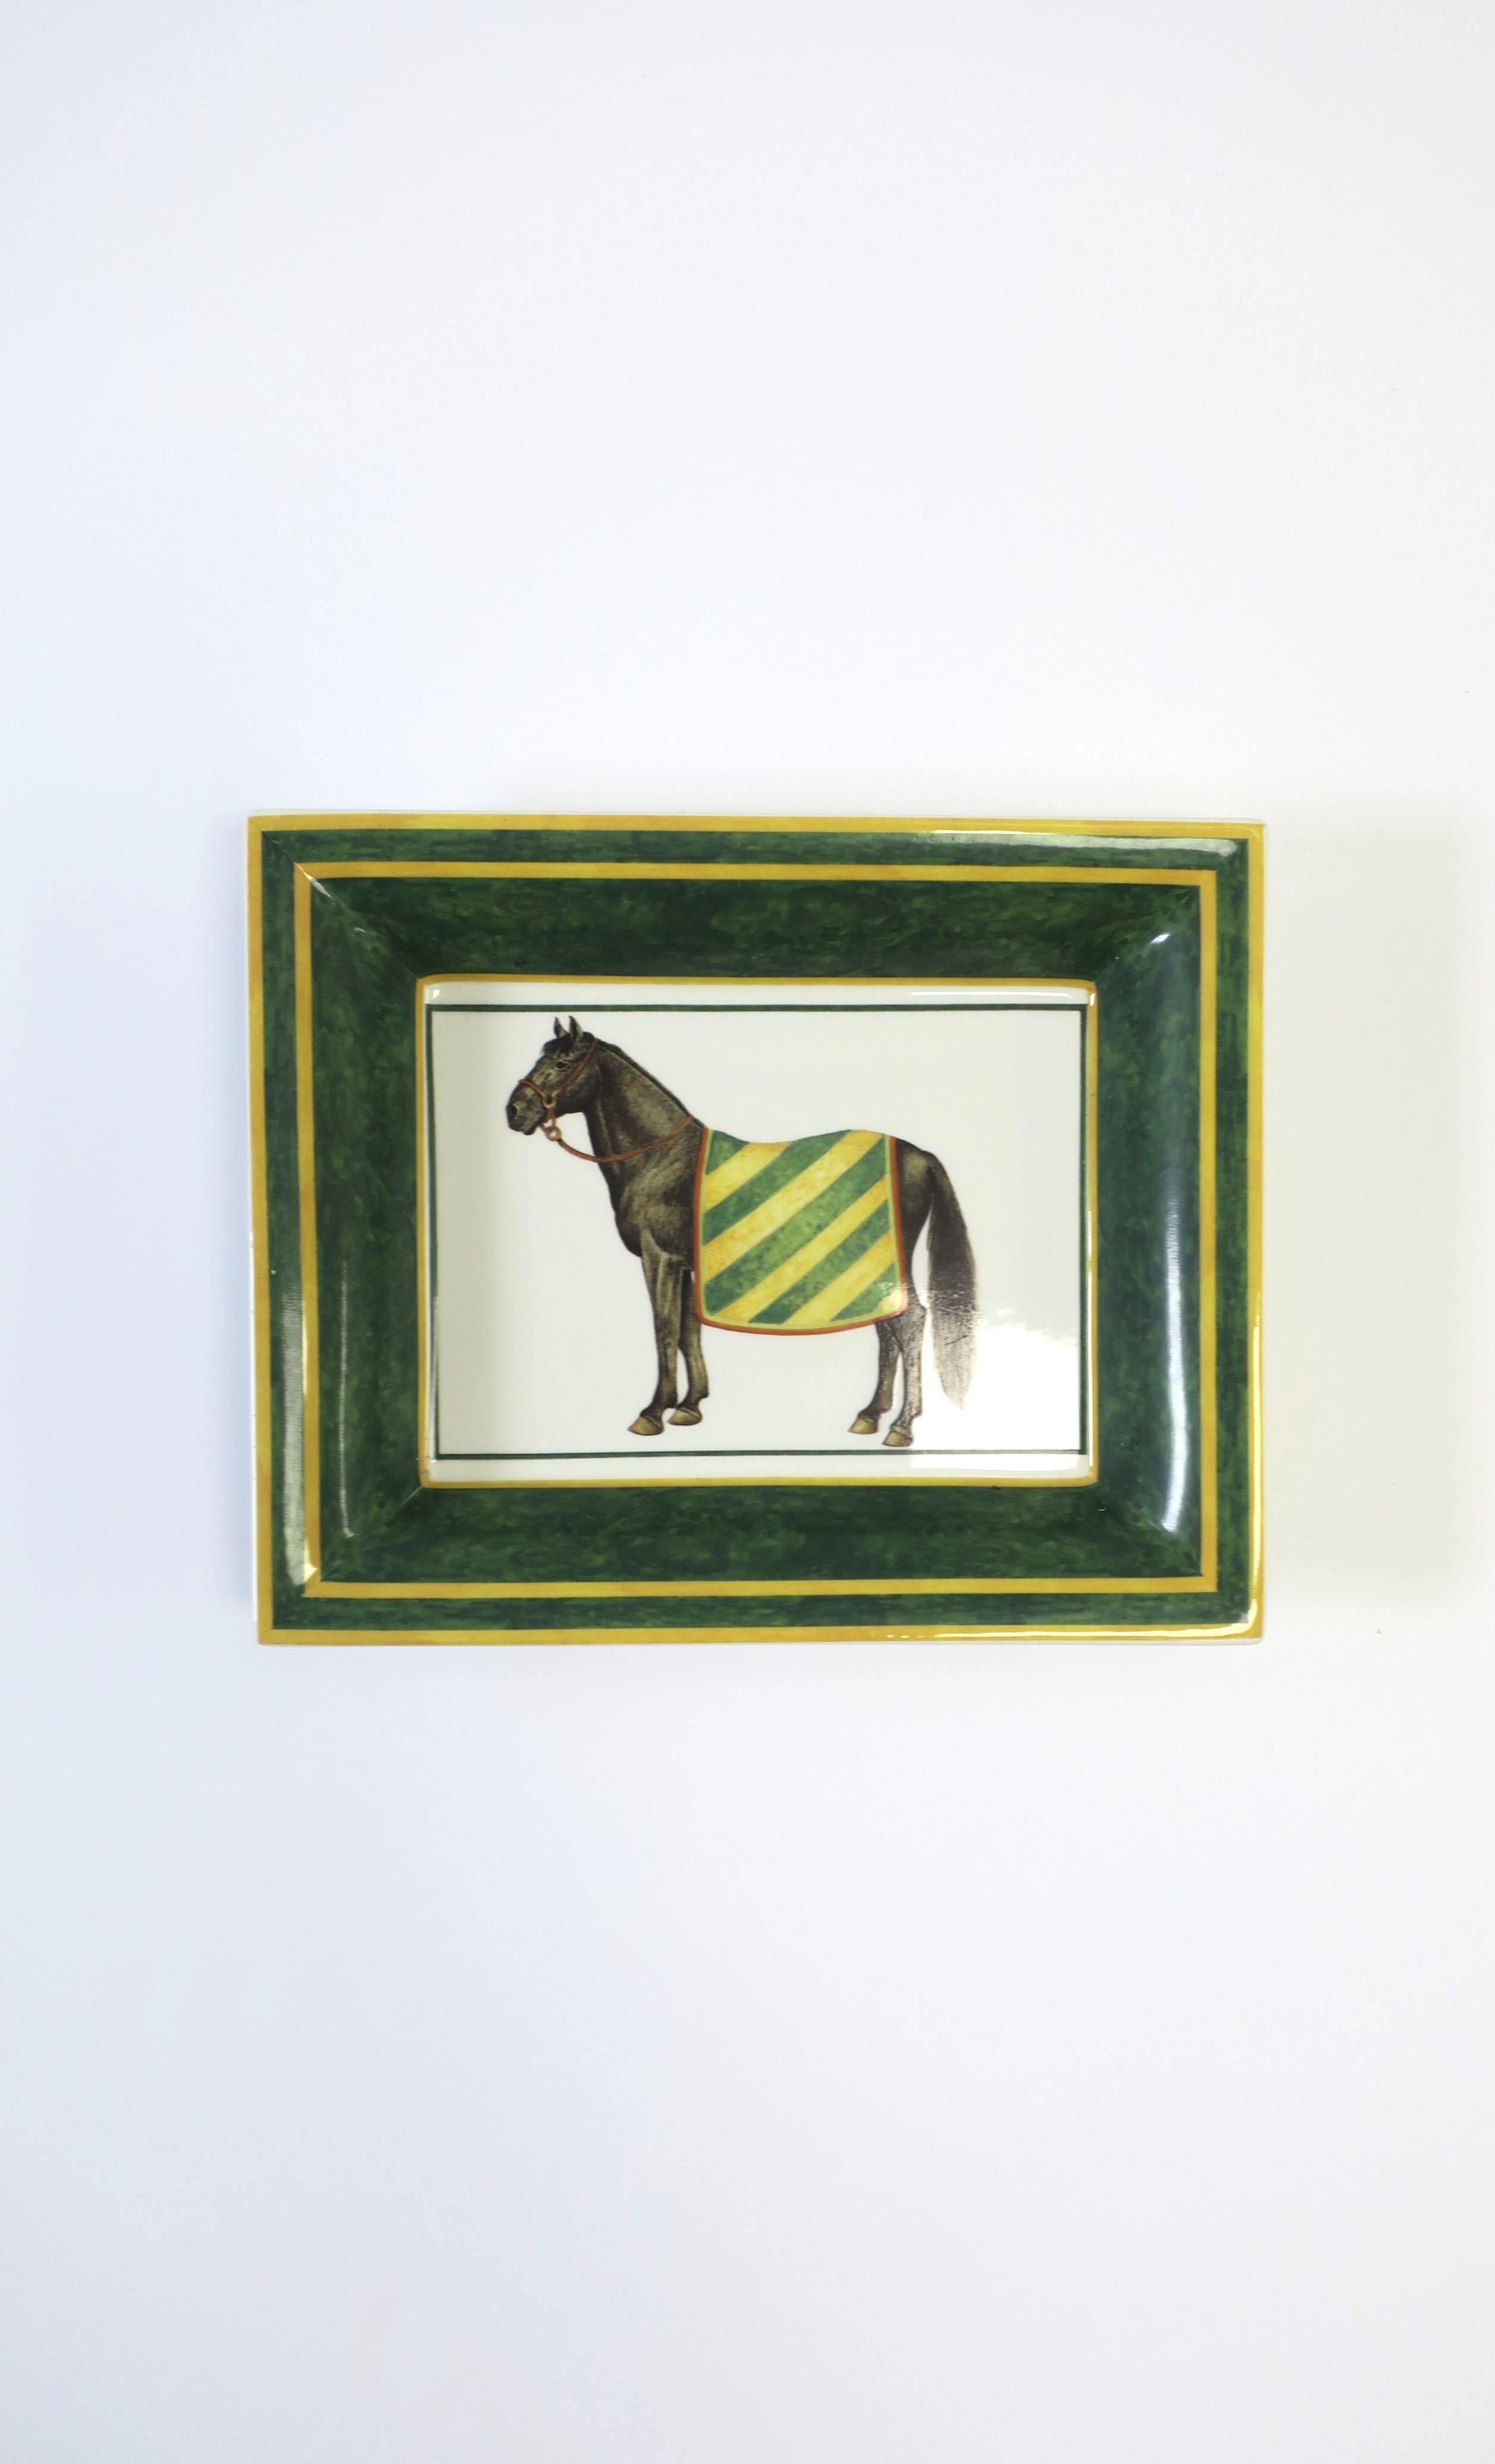 An Italian porcelain jewelry tray catchall/vide-poche dish, circa mid to late-20th century, Italy. Piece has a beautiful portrait of a black thoroughbred horse with colorful blanket. Colors include white porcelain, brown, green, yellow, and red